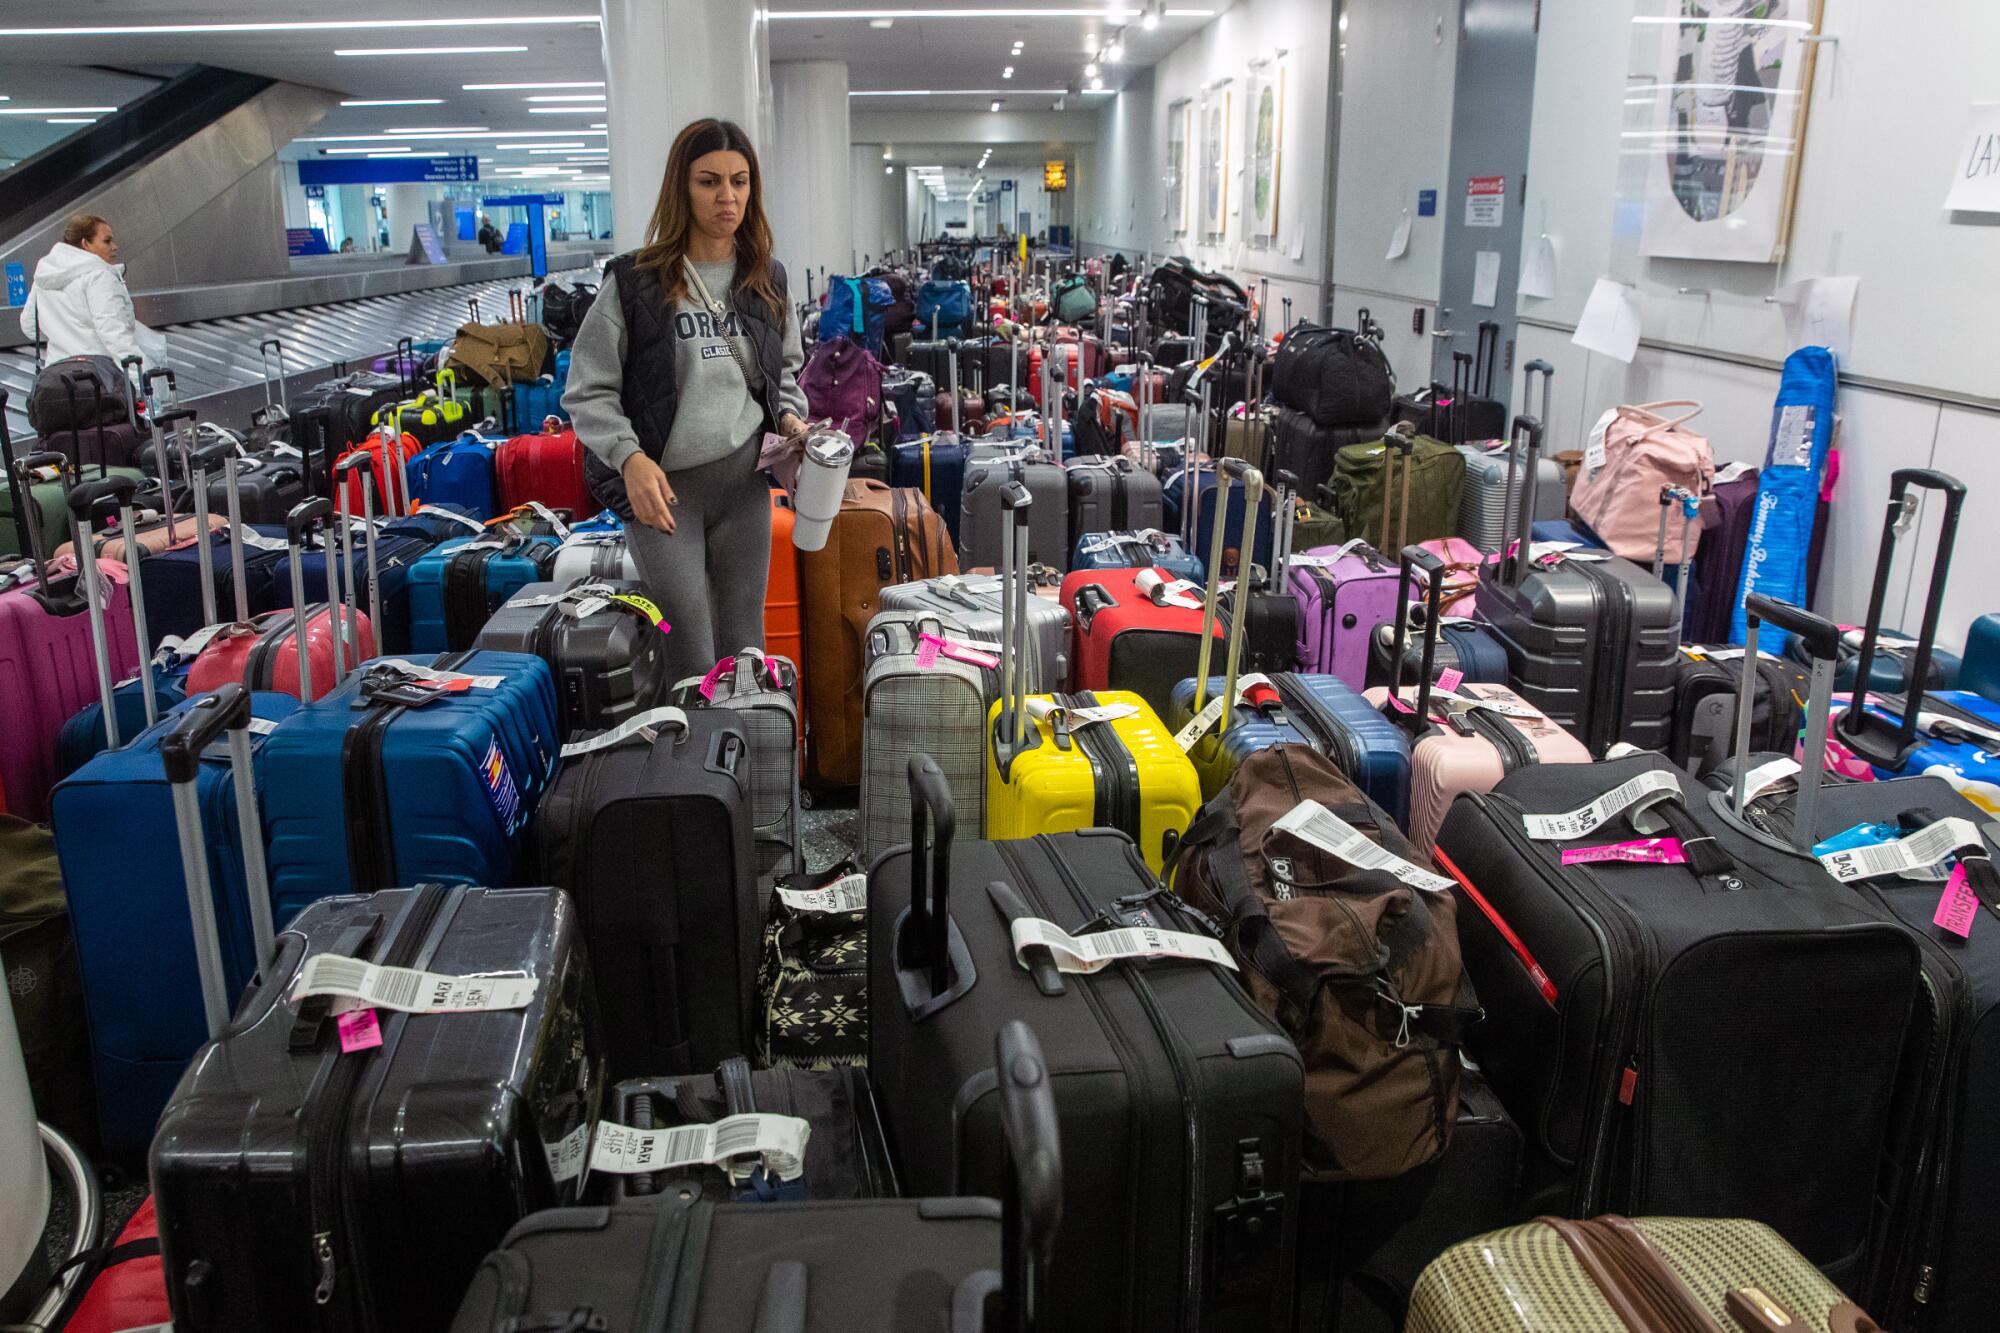 A woman stands among dozens of bags while looking for her luggage.